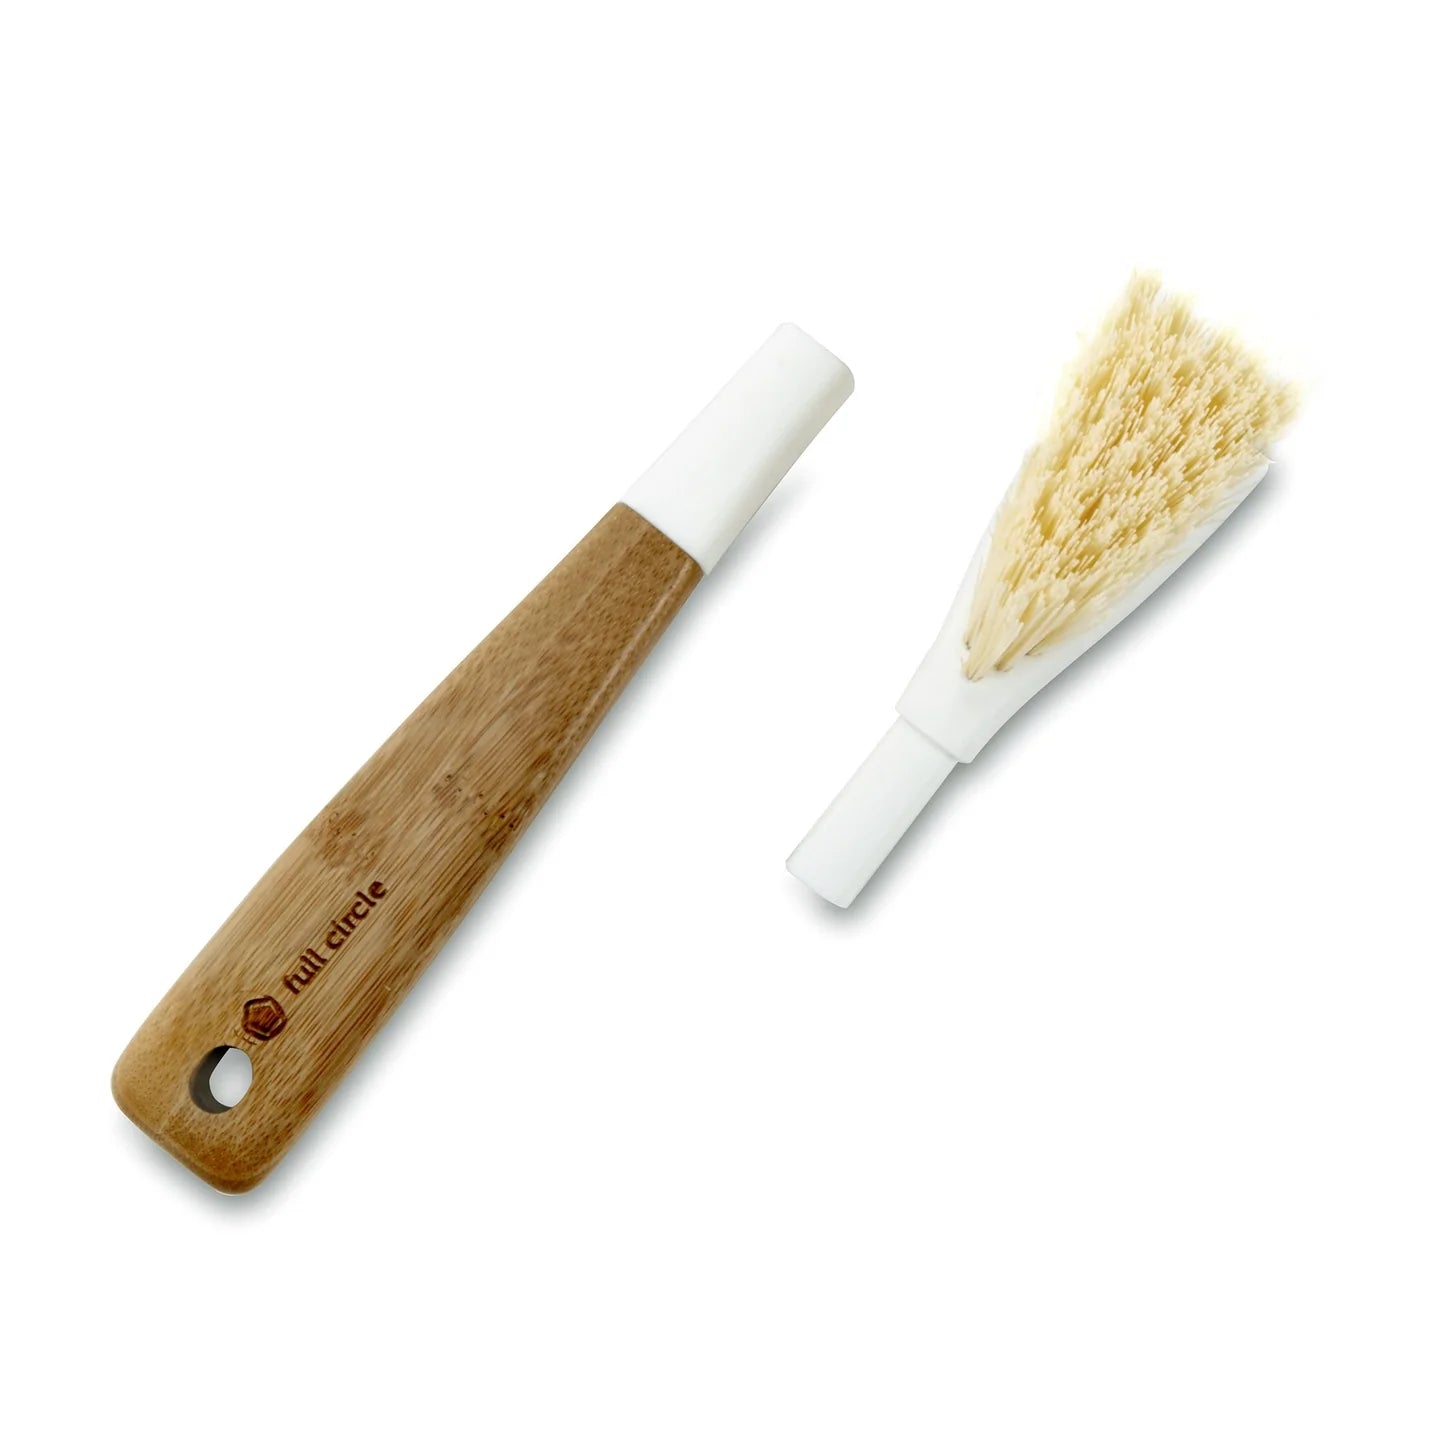 Dish brush with replaceable head - Andrée Jardin